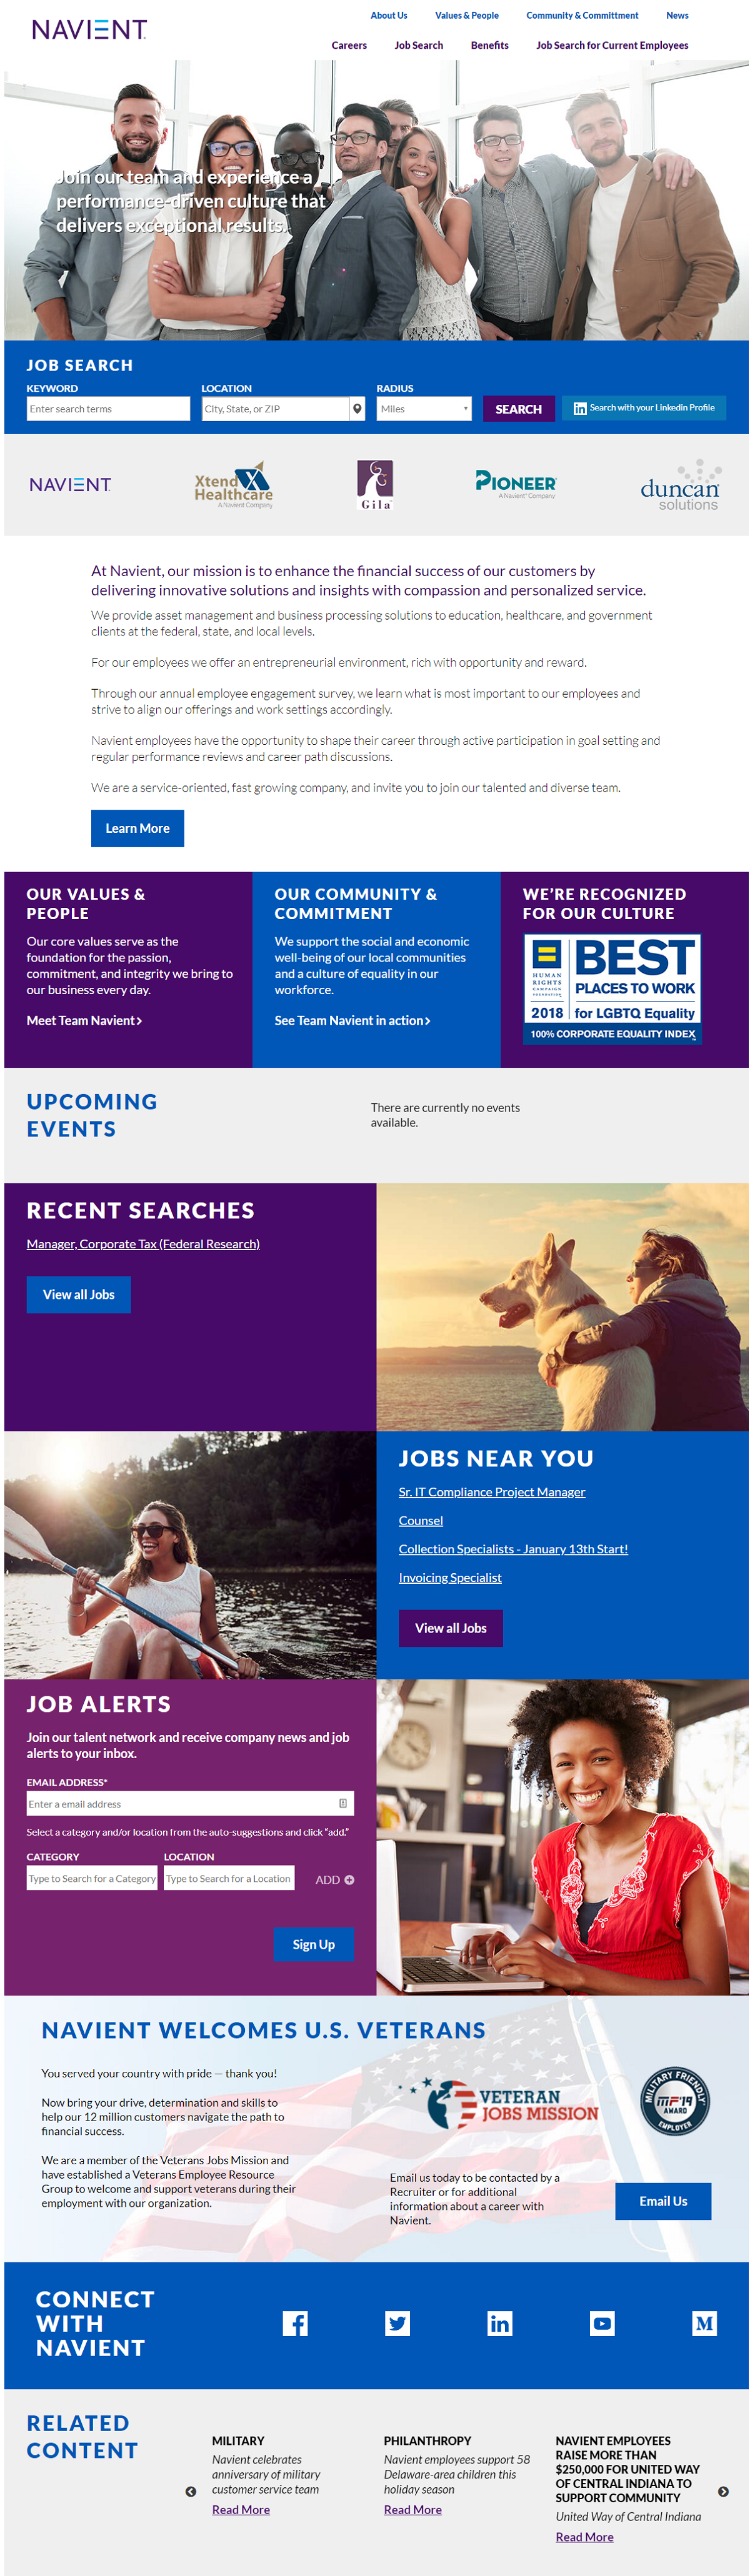 Navient company career page